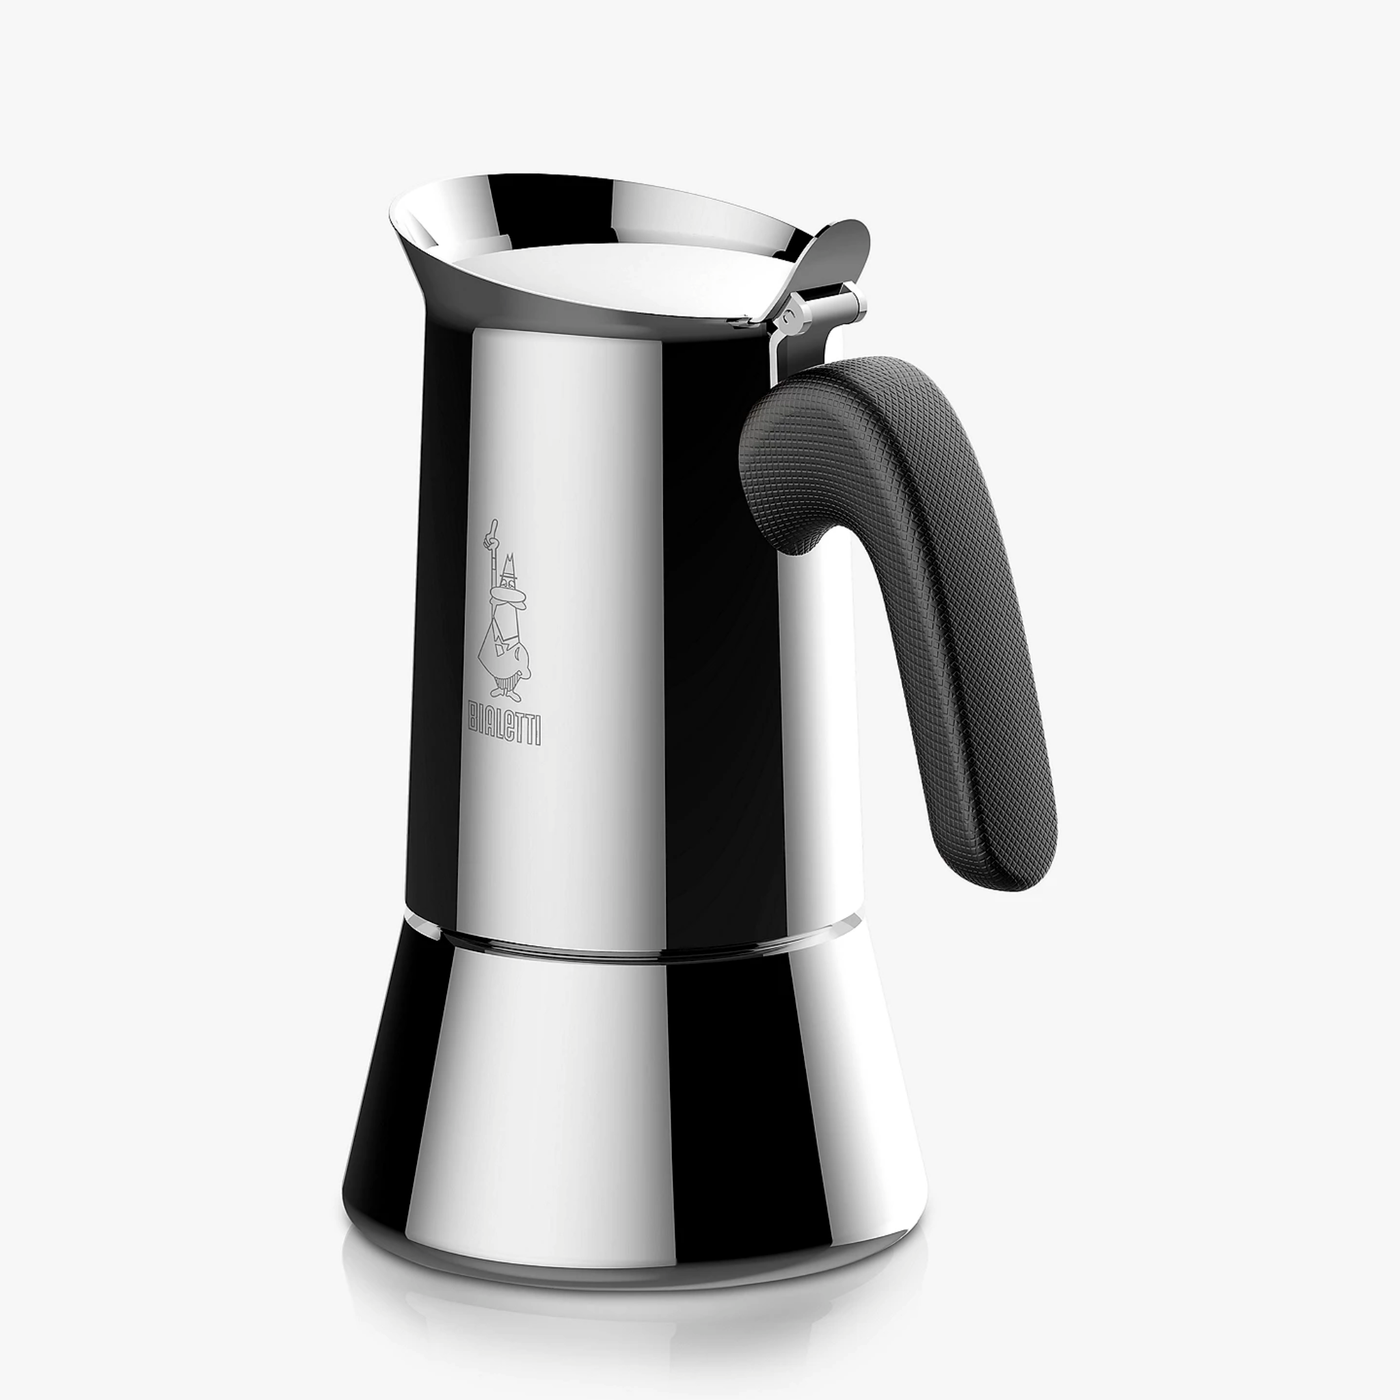 Bialetti Venus Induction Stove-top Coffee Maker, Copper - Interismo Online  Shop Global